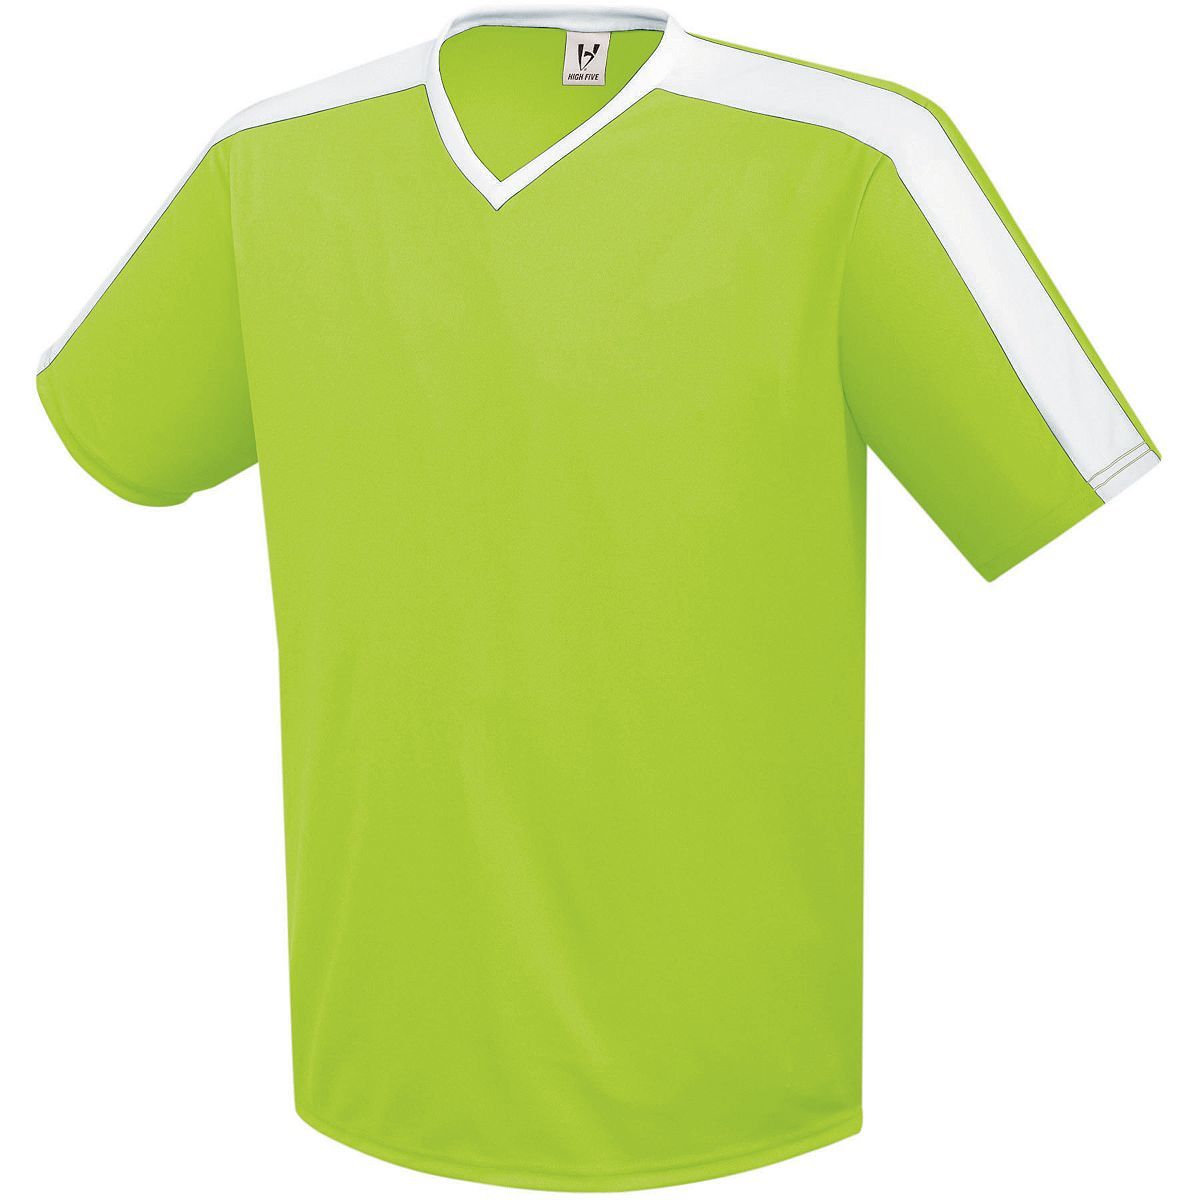 High 5 Genesis Soccer Jersey in Lime/White  -Part of the Adult, Adult-Jersey, High5-Products, Soccer, Shirts, All-Sports-1 product lines at KanaleyCreations.com